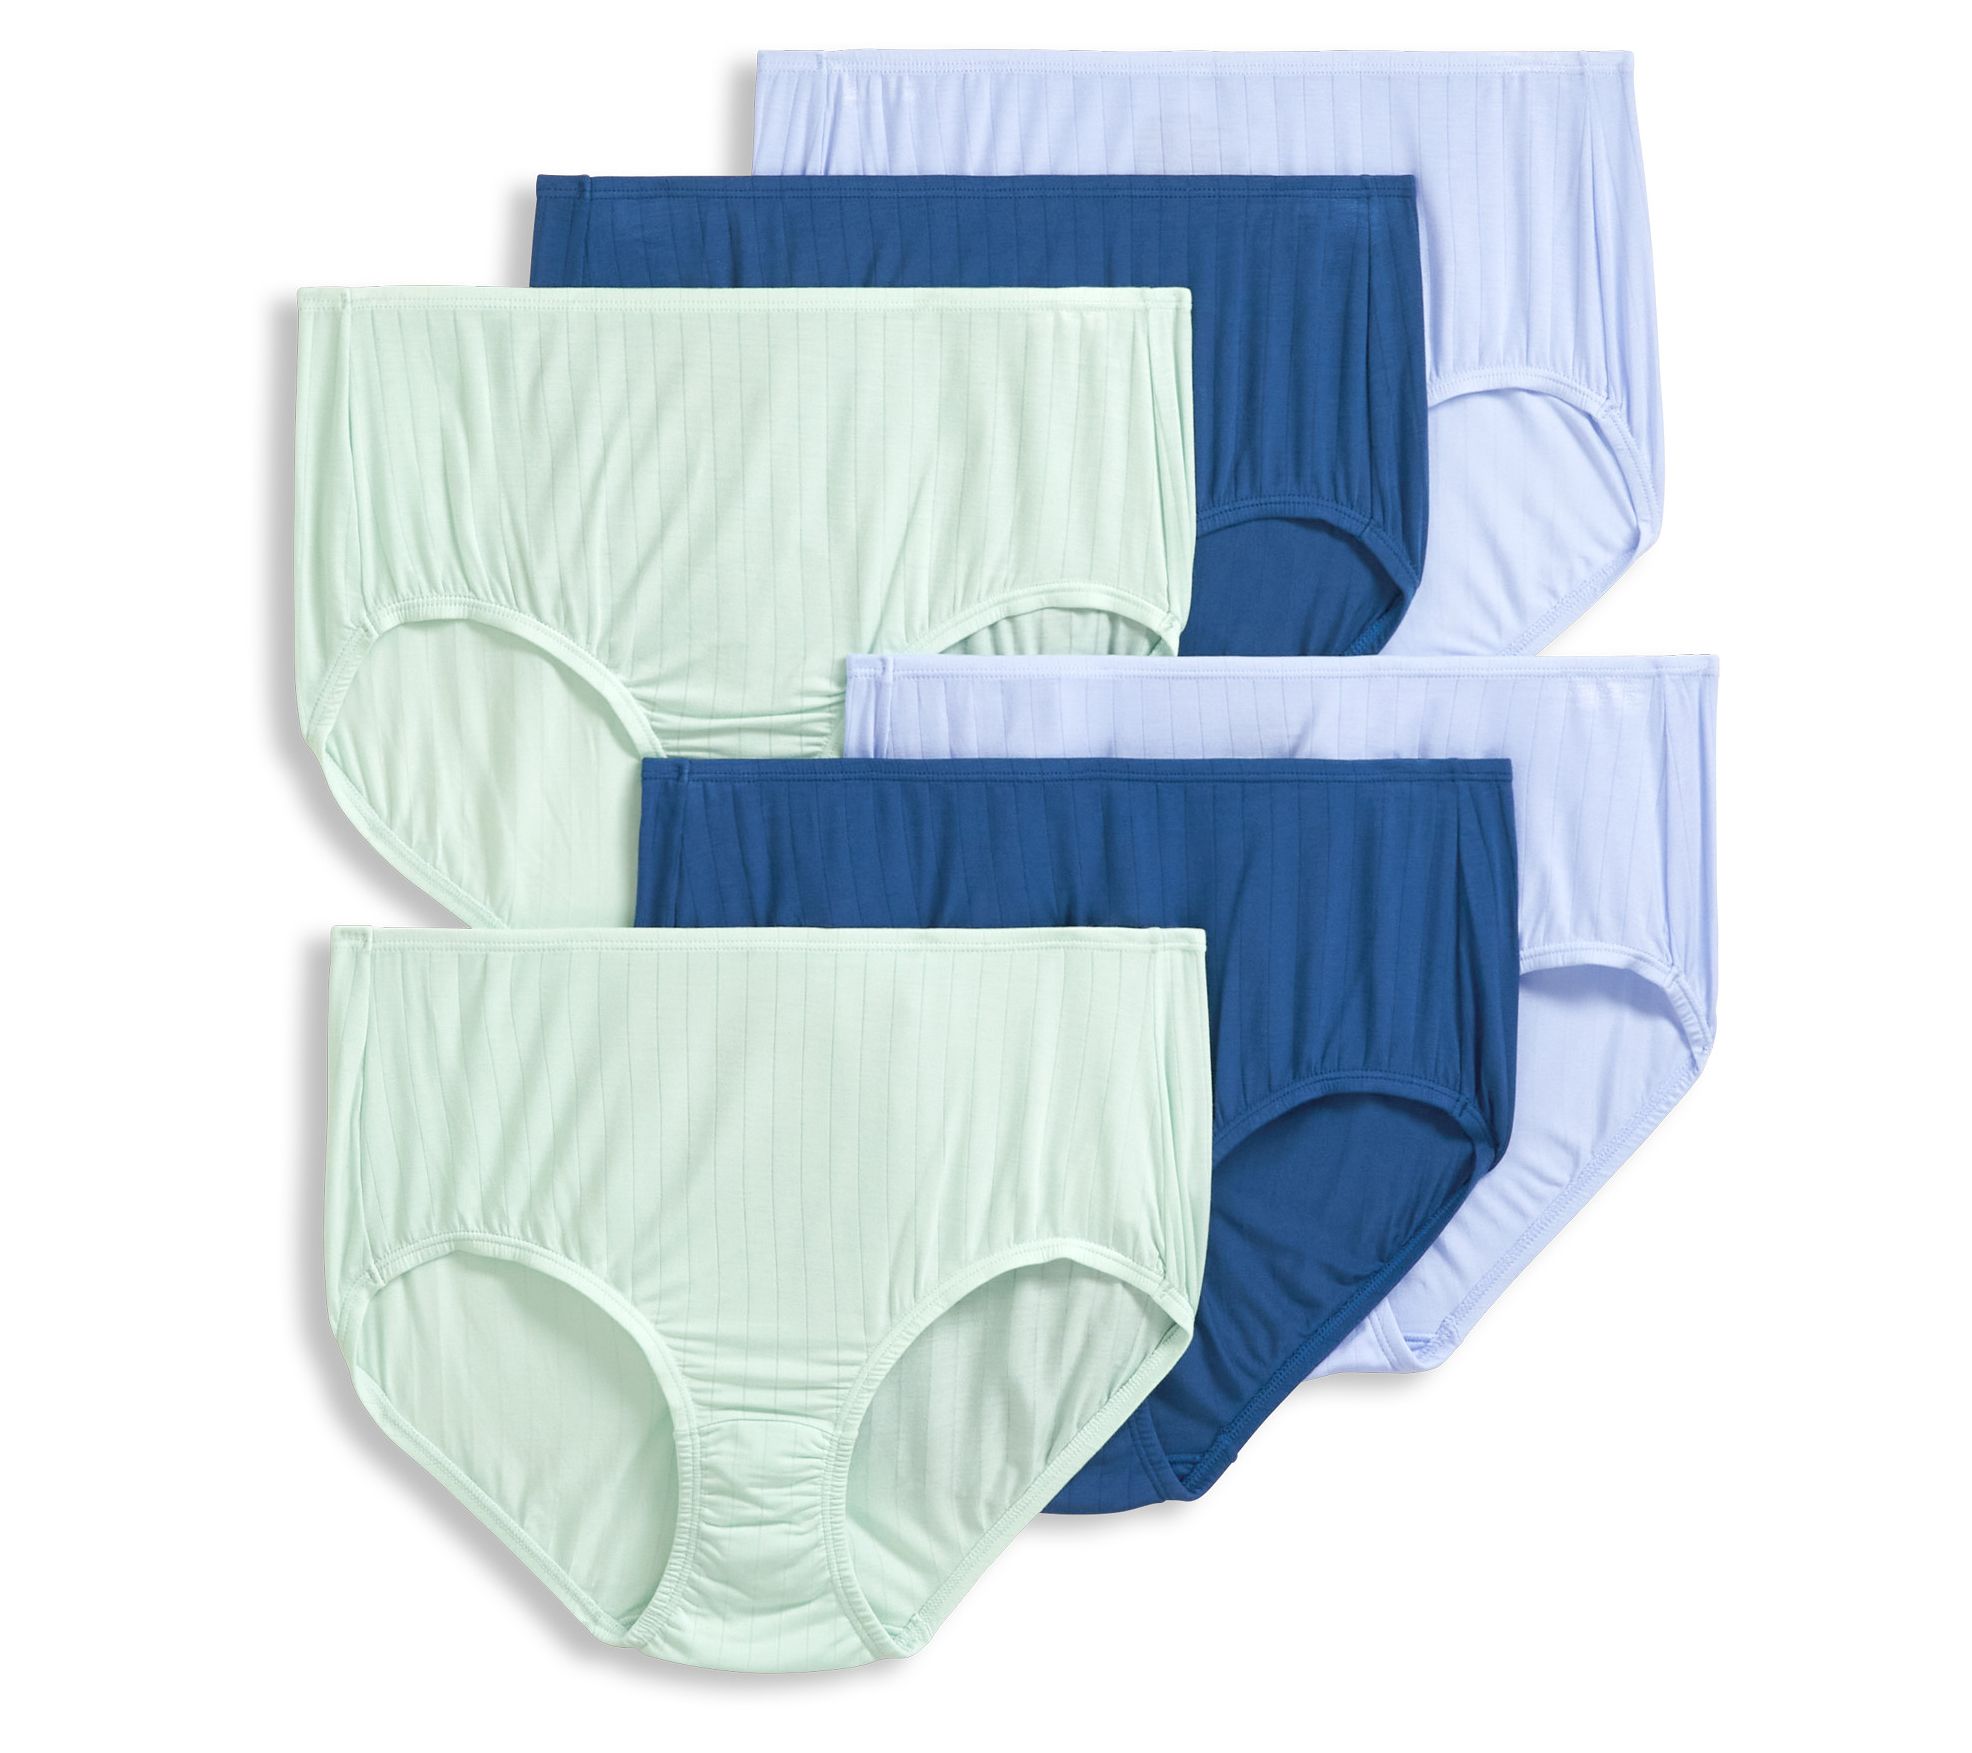 Jockey Supersoft Breathe 6-Pack French Cut Panties 